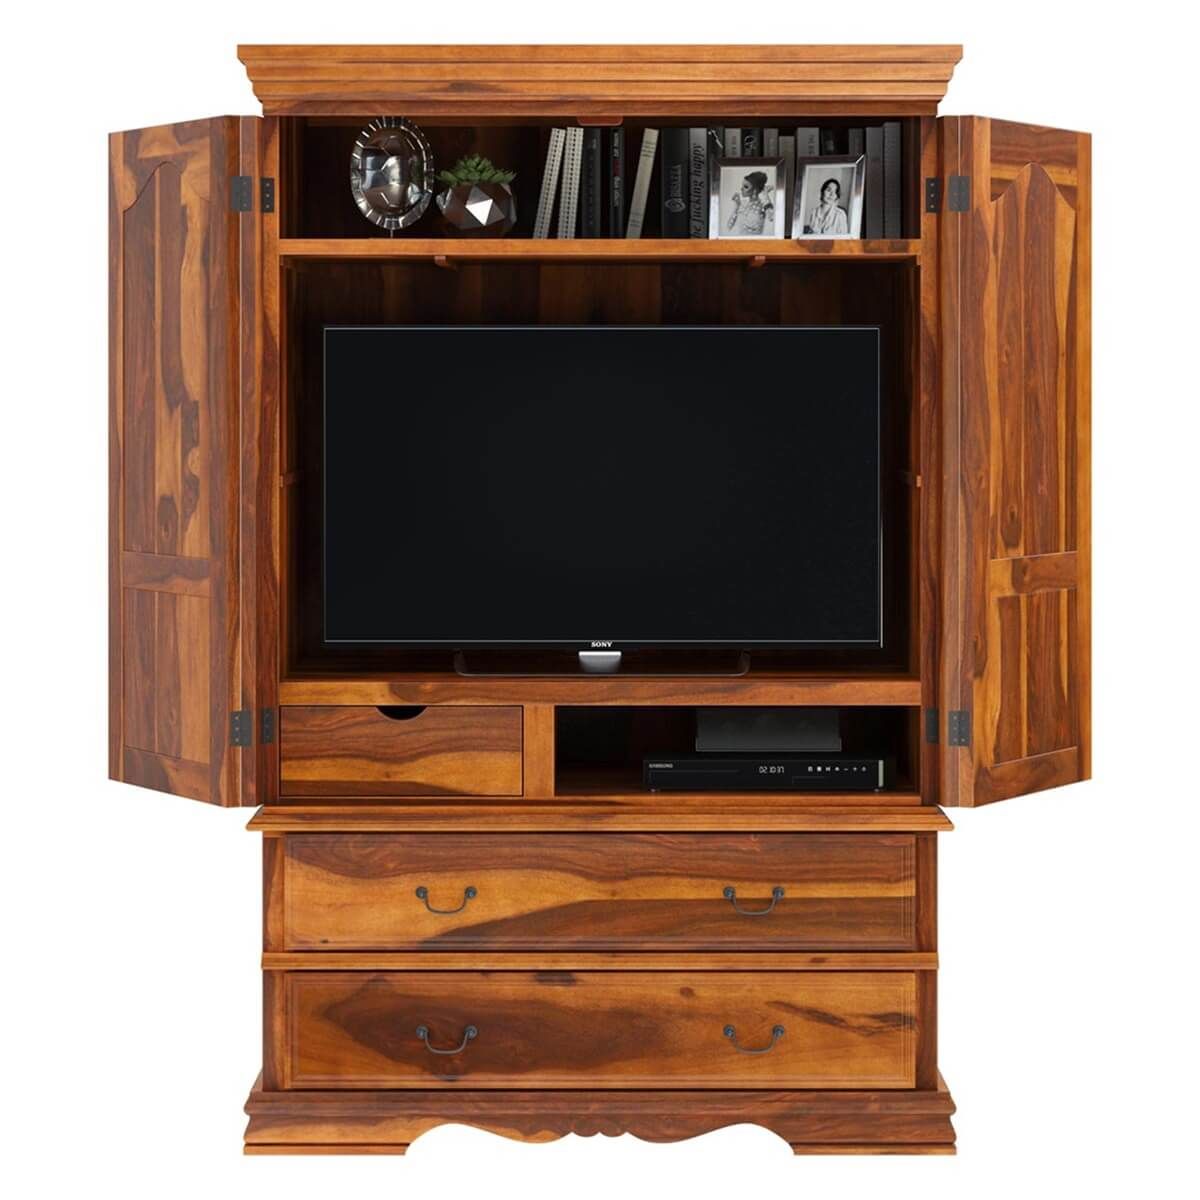 Shelburne Rustic Solid Wood Large Tv Armoire Cabinet With Pertaining To Large Tv Cabinets (View 11 of 15)